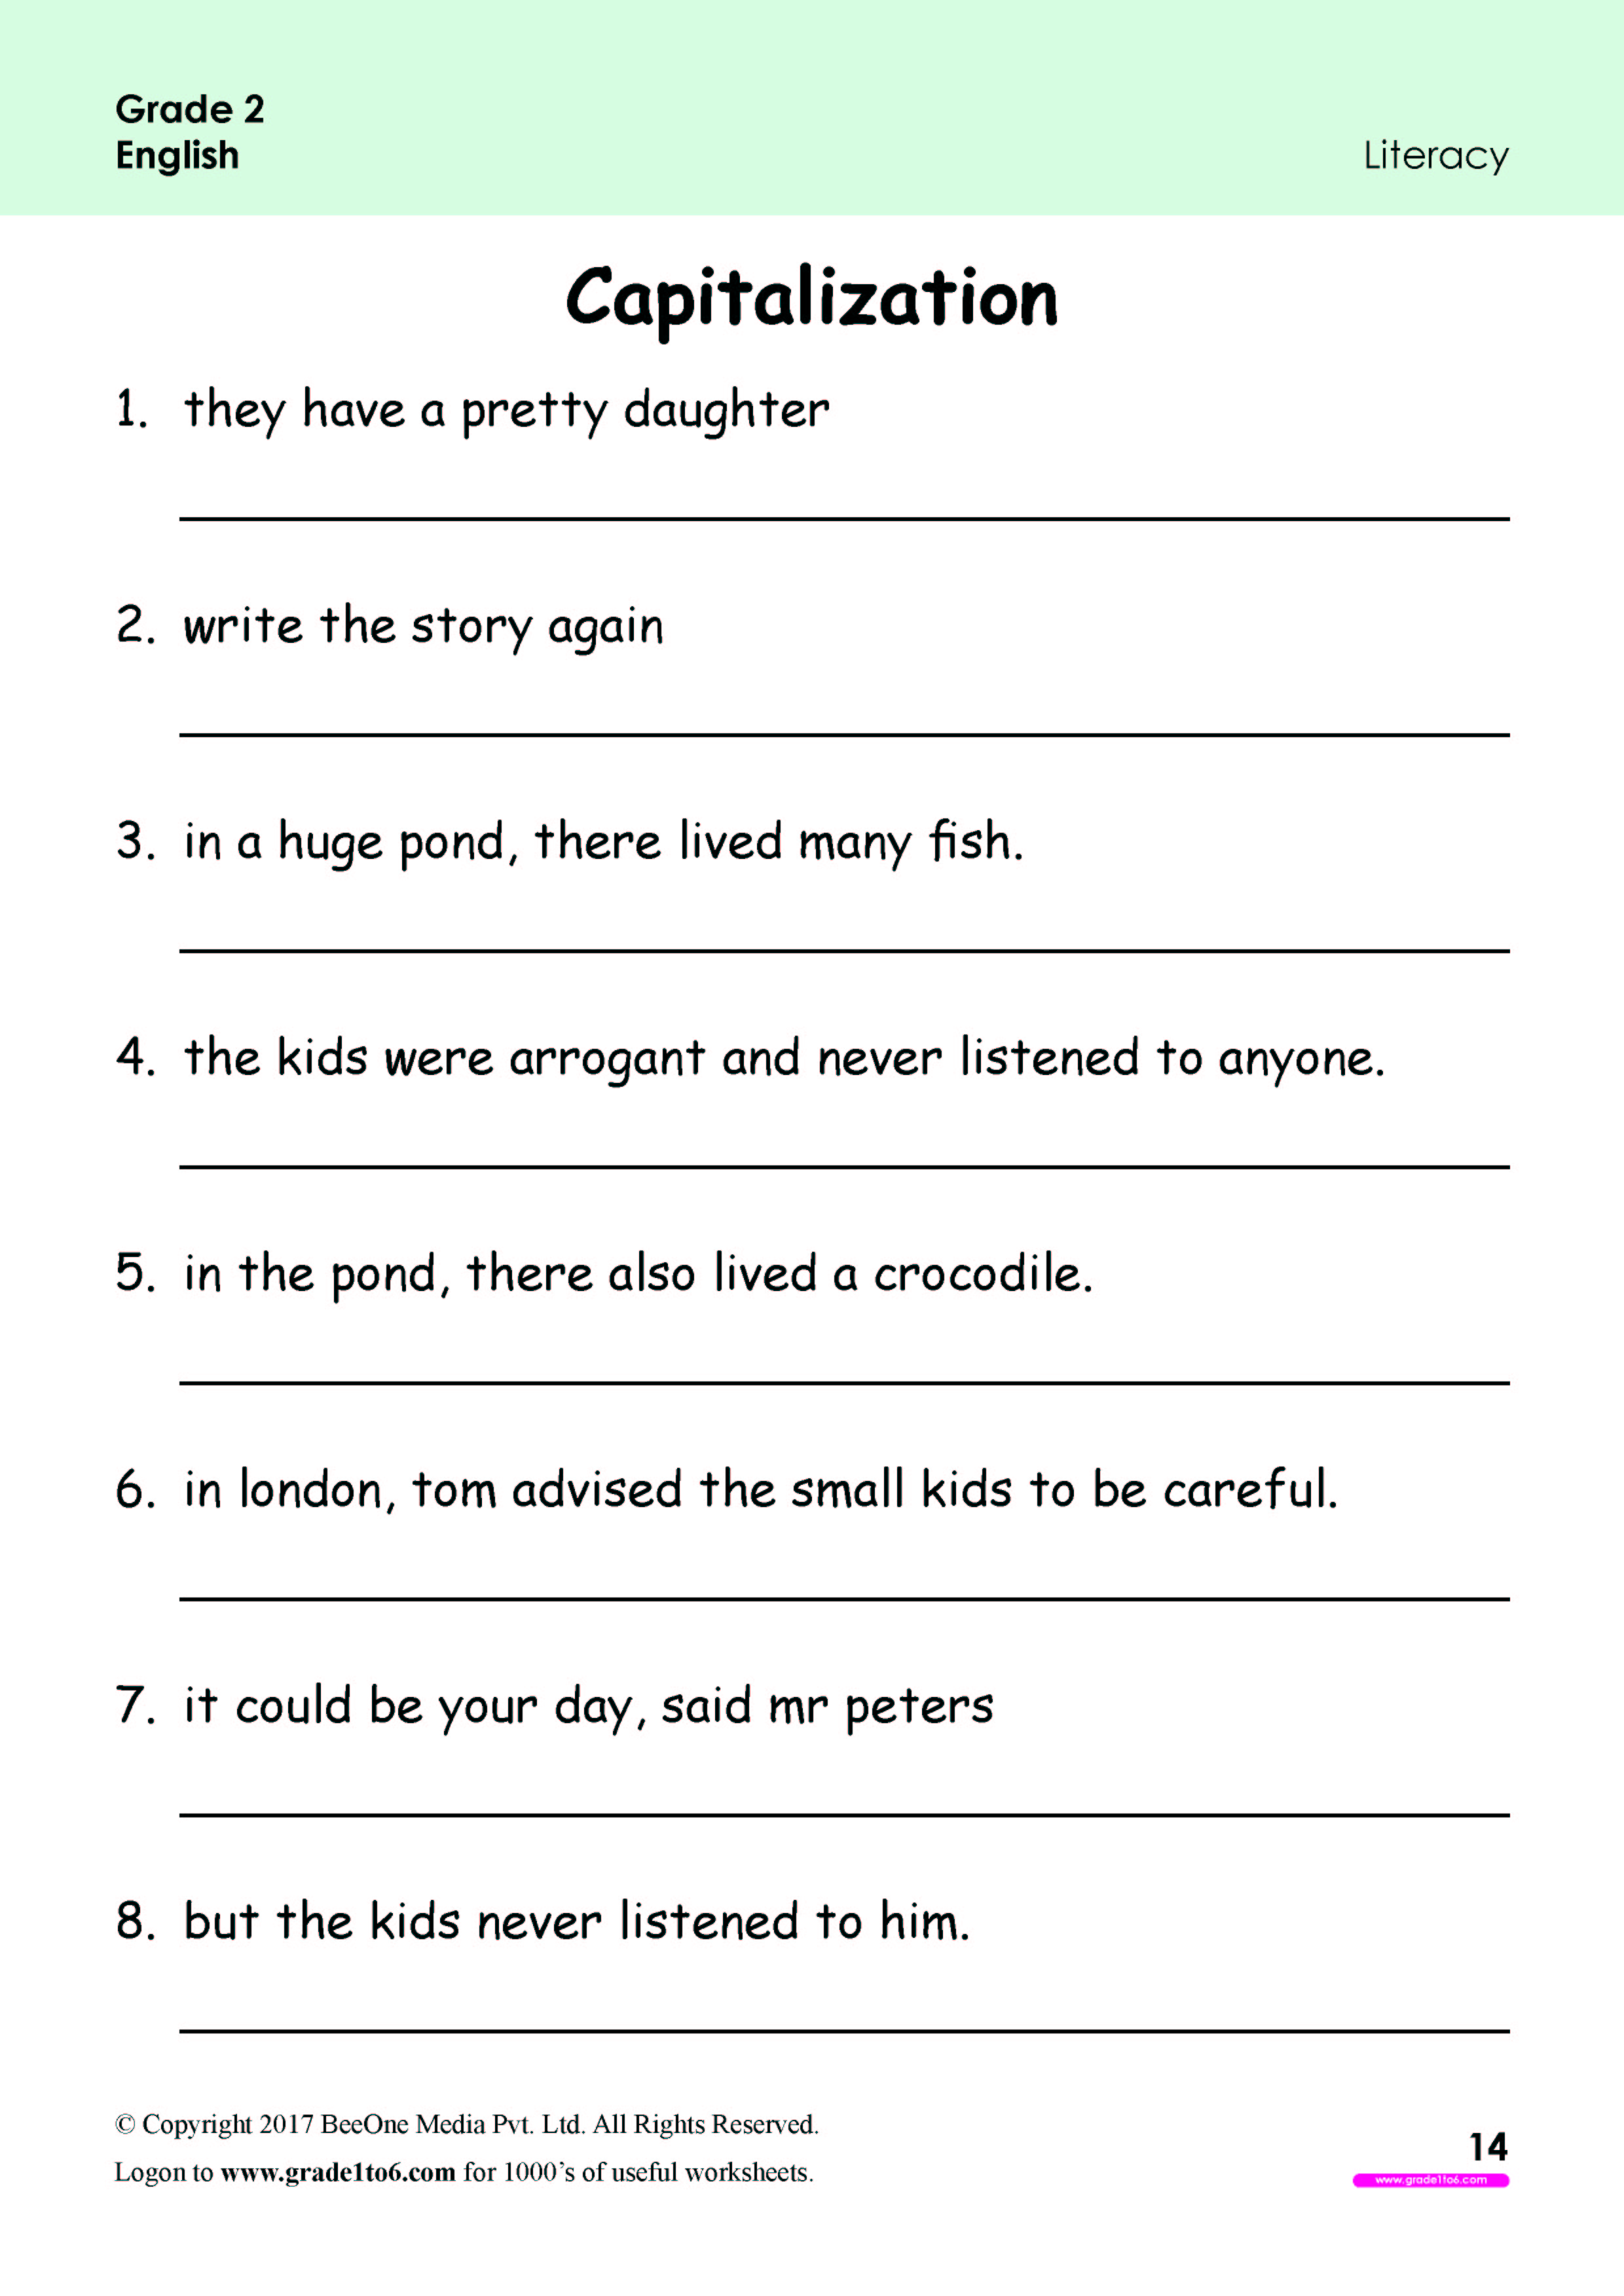 capitalization worksheets for grade 2 www grade1to6 com